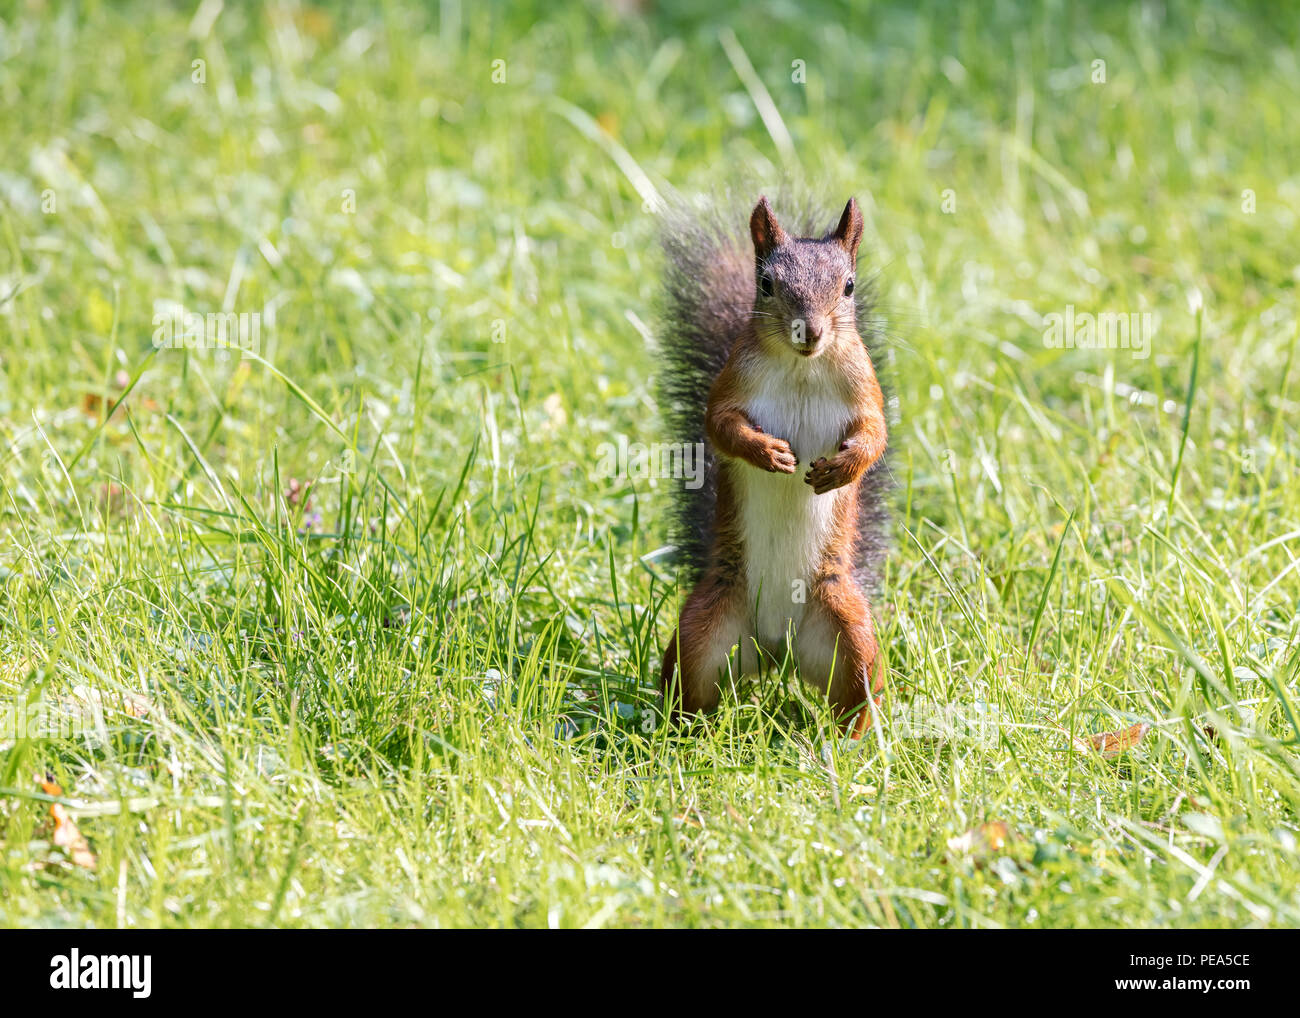 little red squirrel standing in green grass lawn Stock Photo